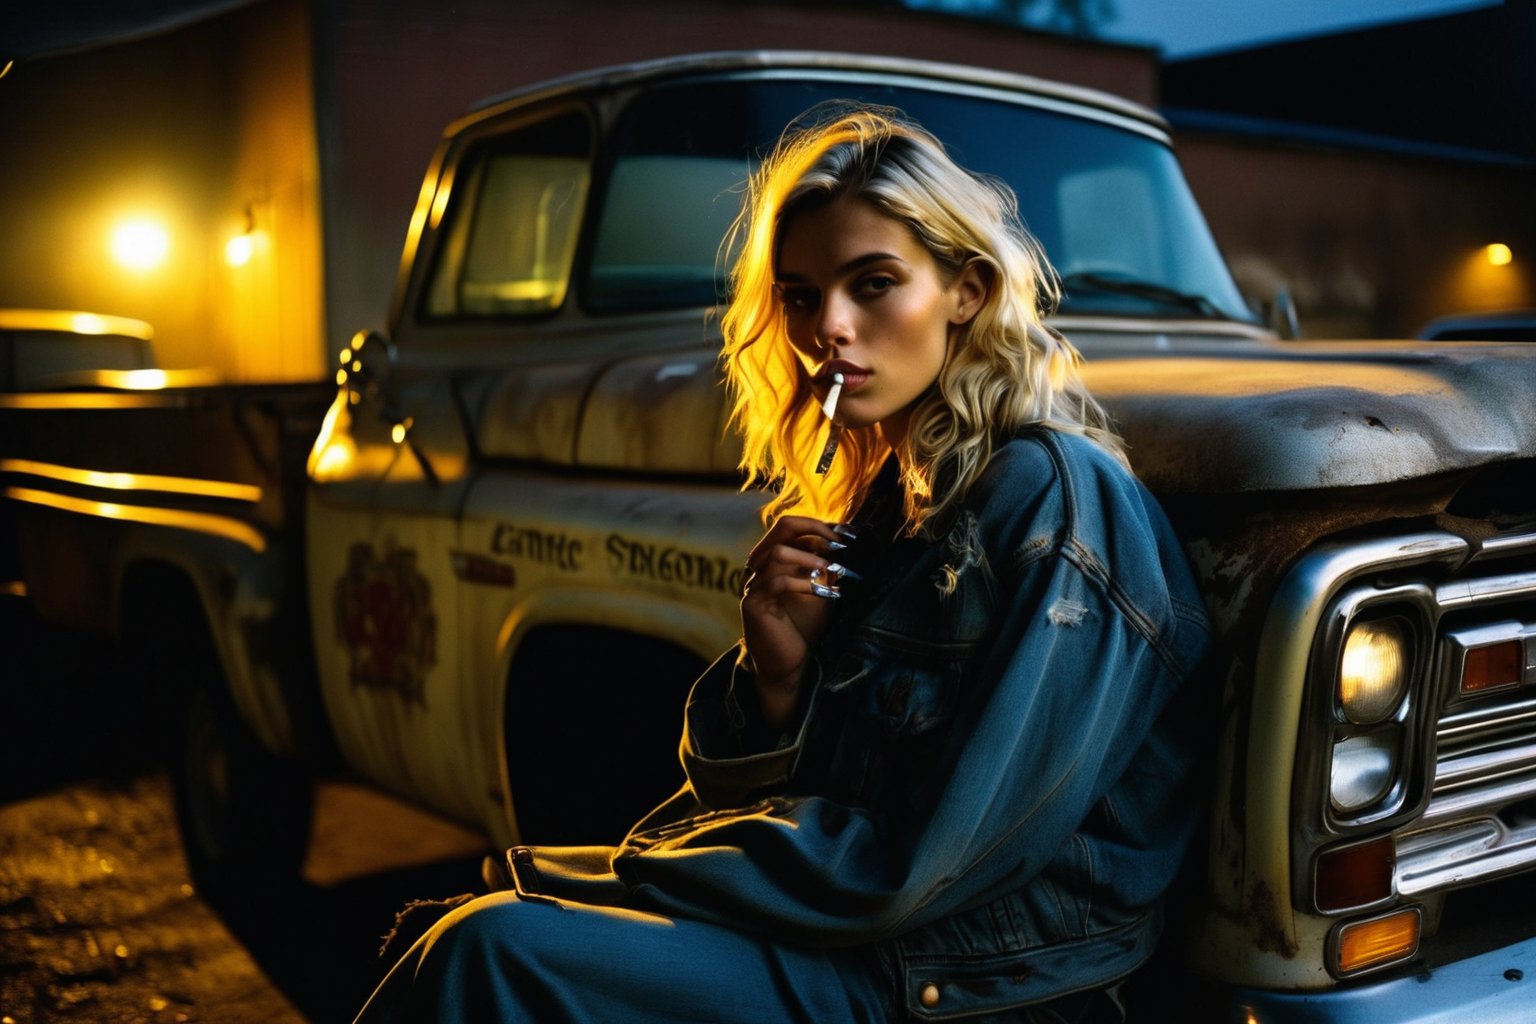 Style by J.C. Leyendecker. Canon 5d Mark 4, Kodak Ektar, 35mm. Closeup of a blonde young woman smoking a cigarette sitting on the back of a dusty pickup truck in a dimly lit parking lot at night. She is holding the cigarette with her hand. Her outfit consists of a denim jacket. The truck's tailgate is down, revealing a jumble of boxes and crates. The atmosphere is moody and mysterious, with the yellow glow of the streetlight casting long shadows and reflecting off the truck's metal surface.